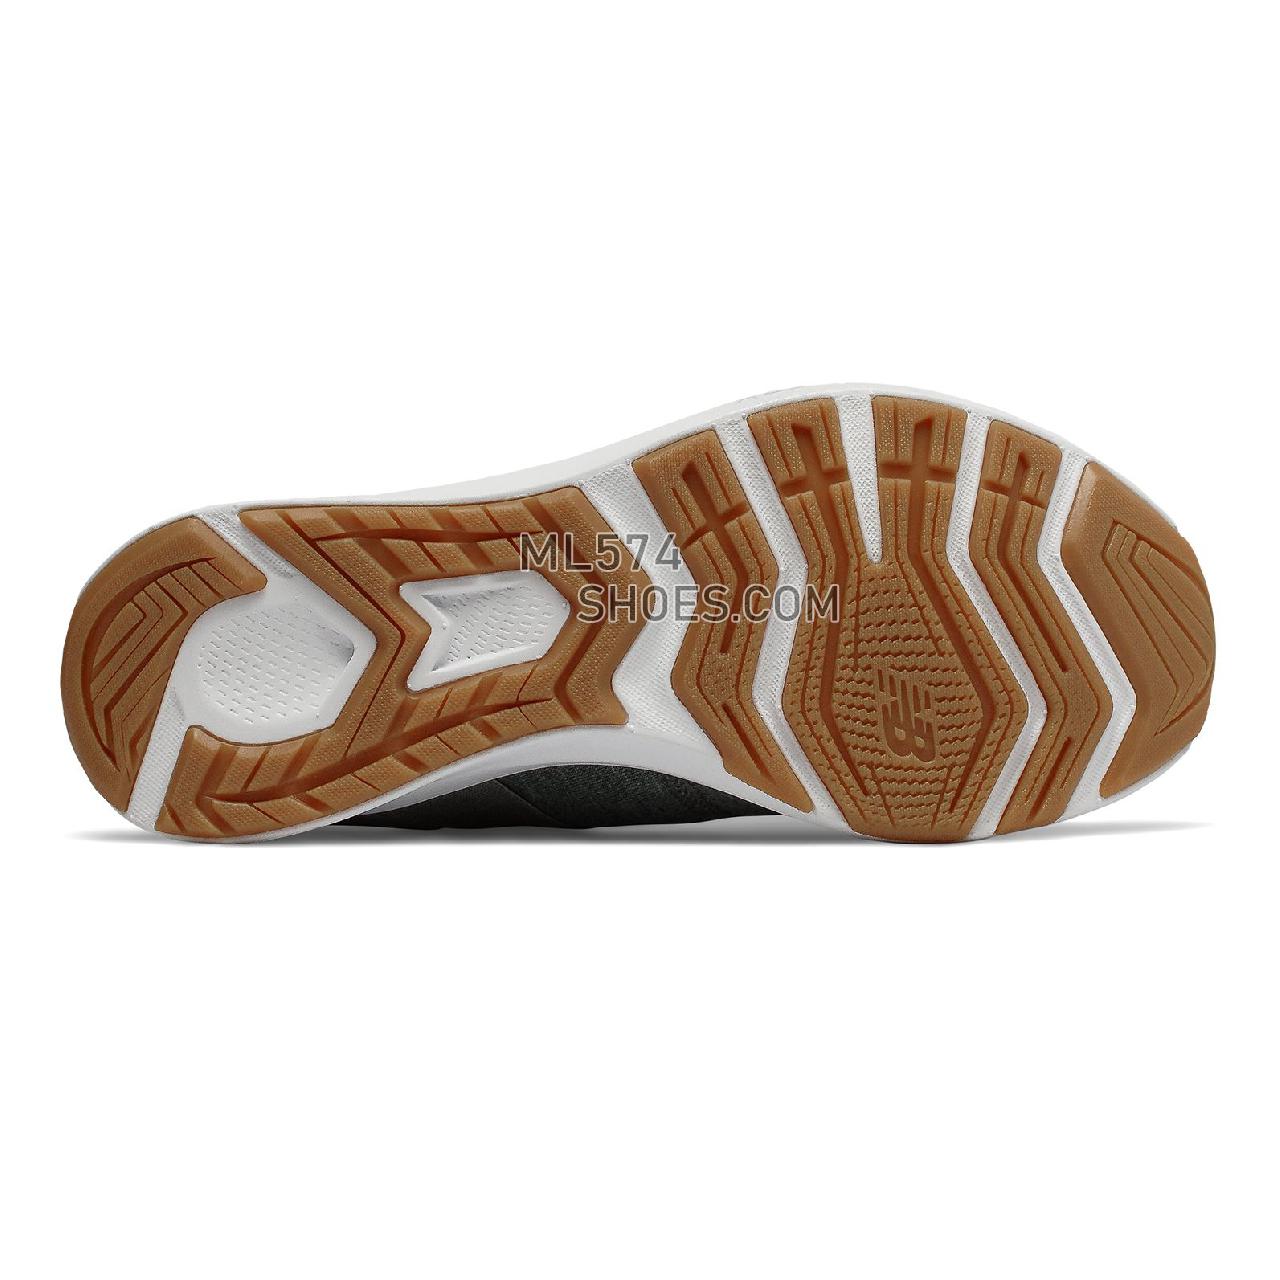 New Balance FuelCore NERGIZE - Women's  - X-training Vintage Cedar with White - WXNRGGR